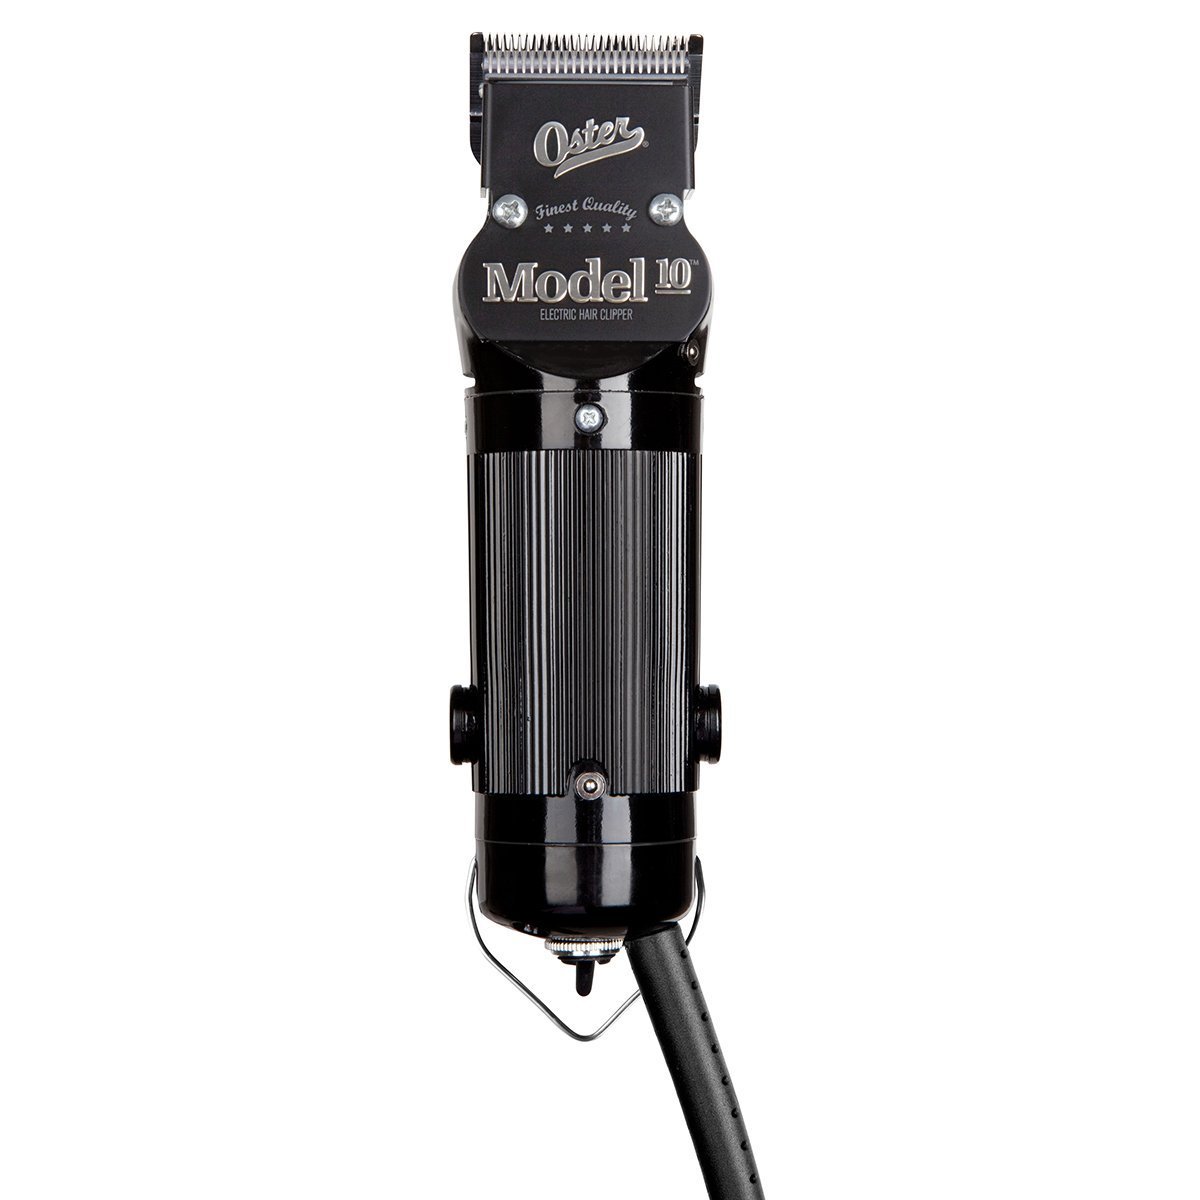 Oster Model 10 Classic Professional Barber Salon Pro Hair Grooming Clipper-2